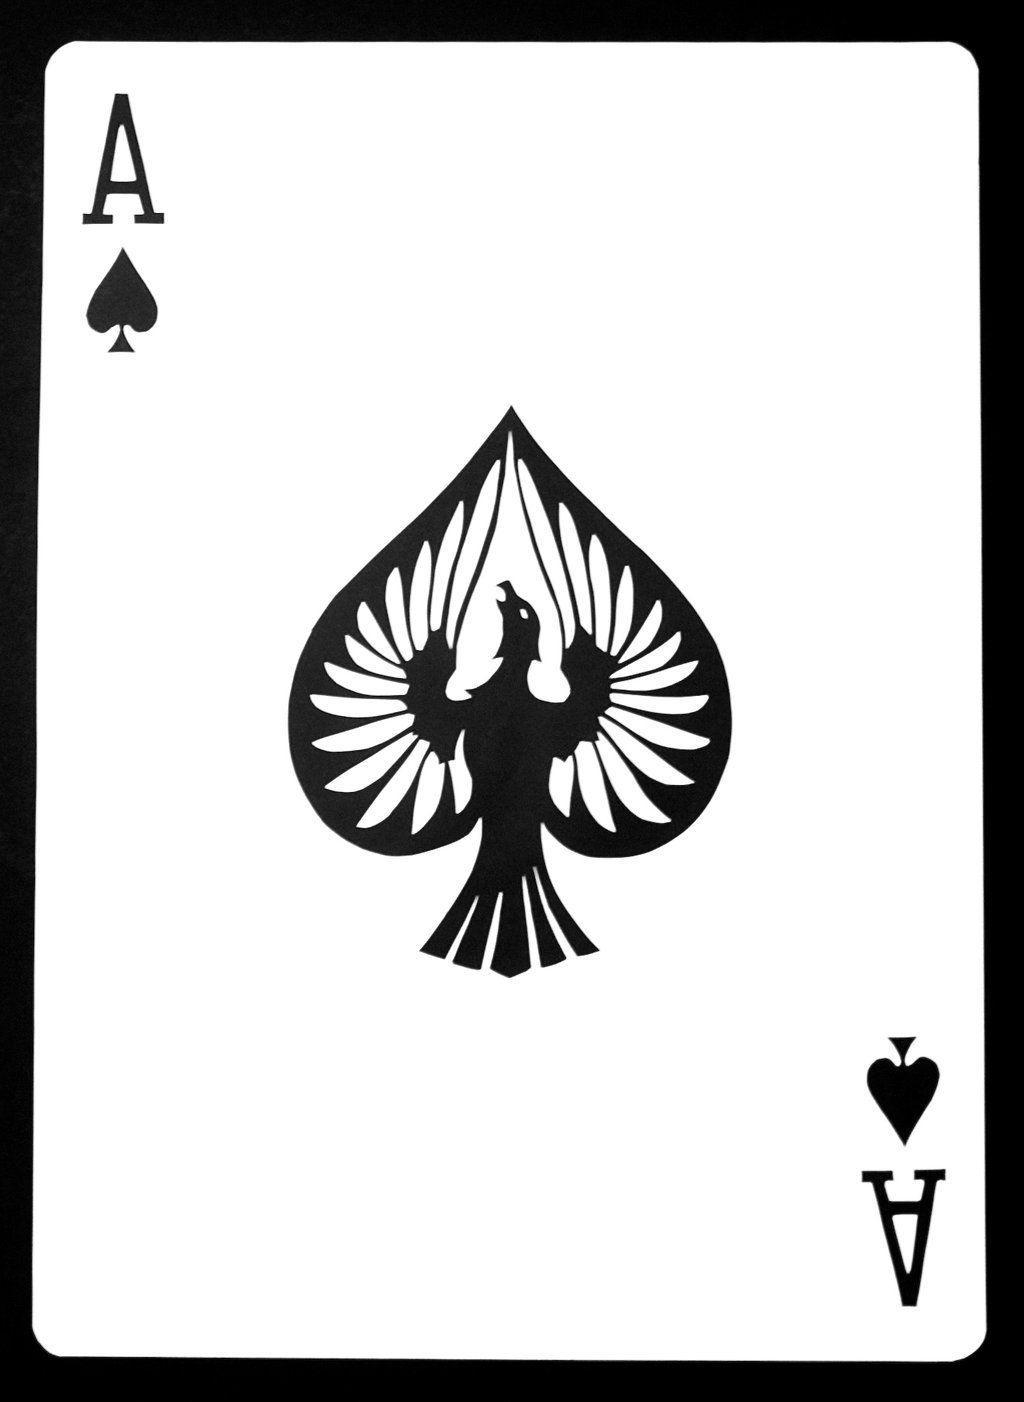 Awesome Ace Of Spades Image. Ace Of Spades Wallpaper